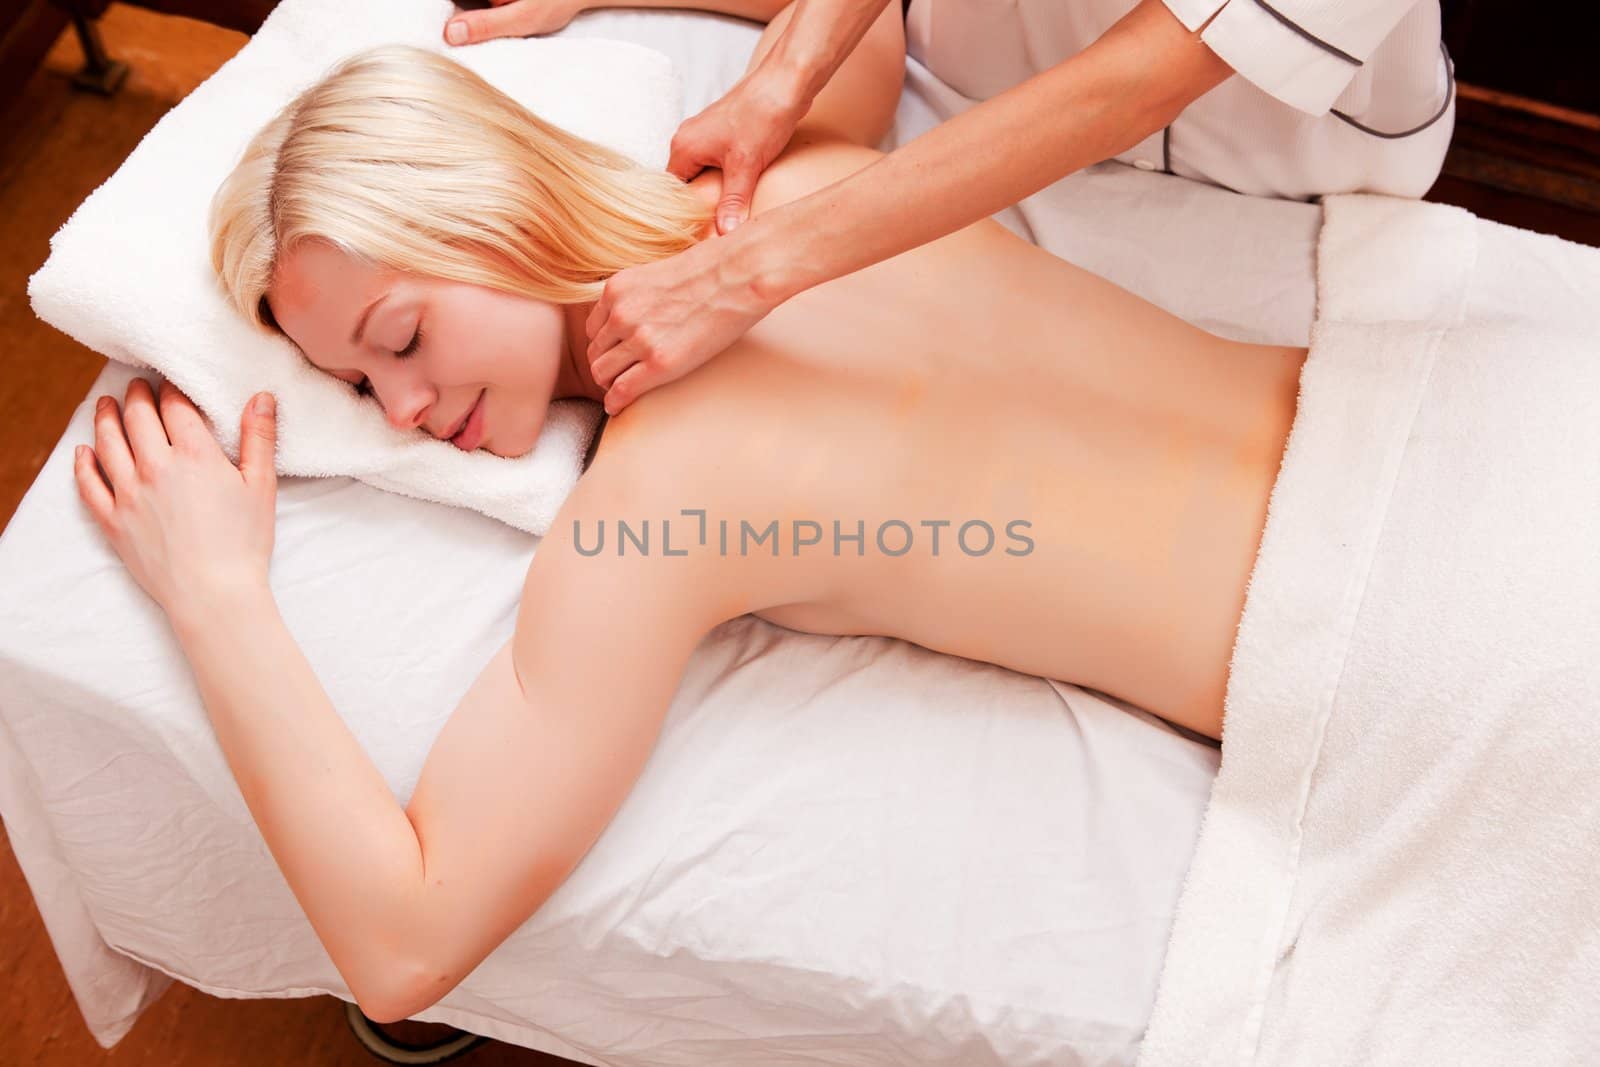 A blond caucasian woman receiving a shoulder massage at an old style spa